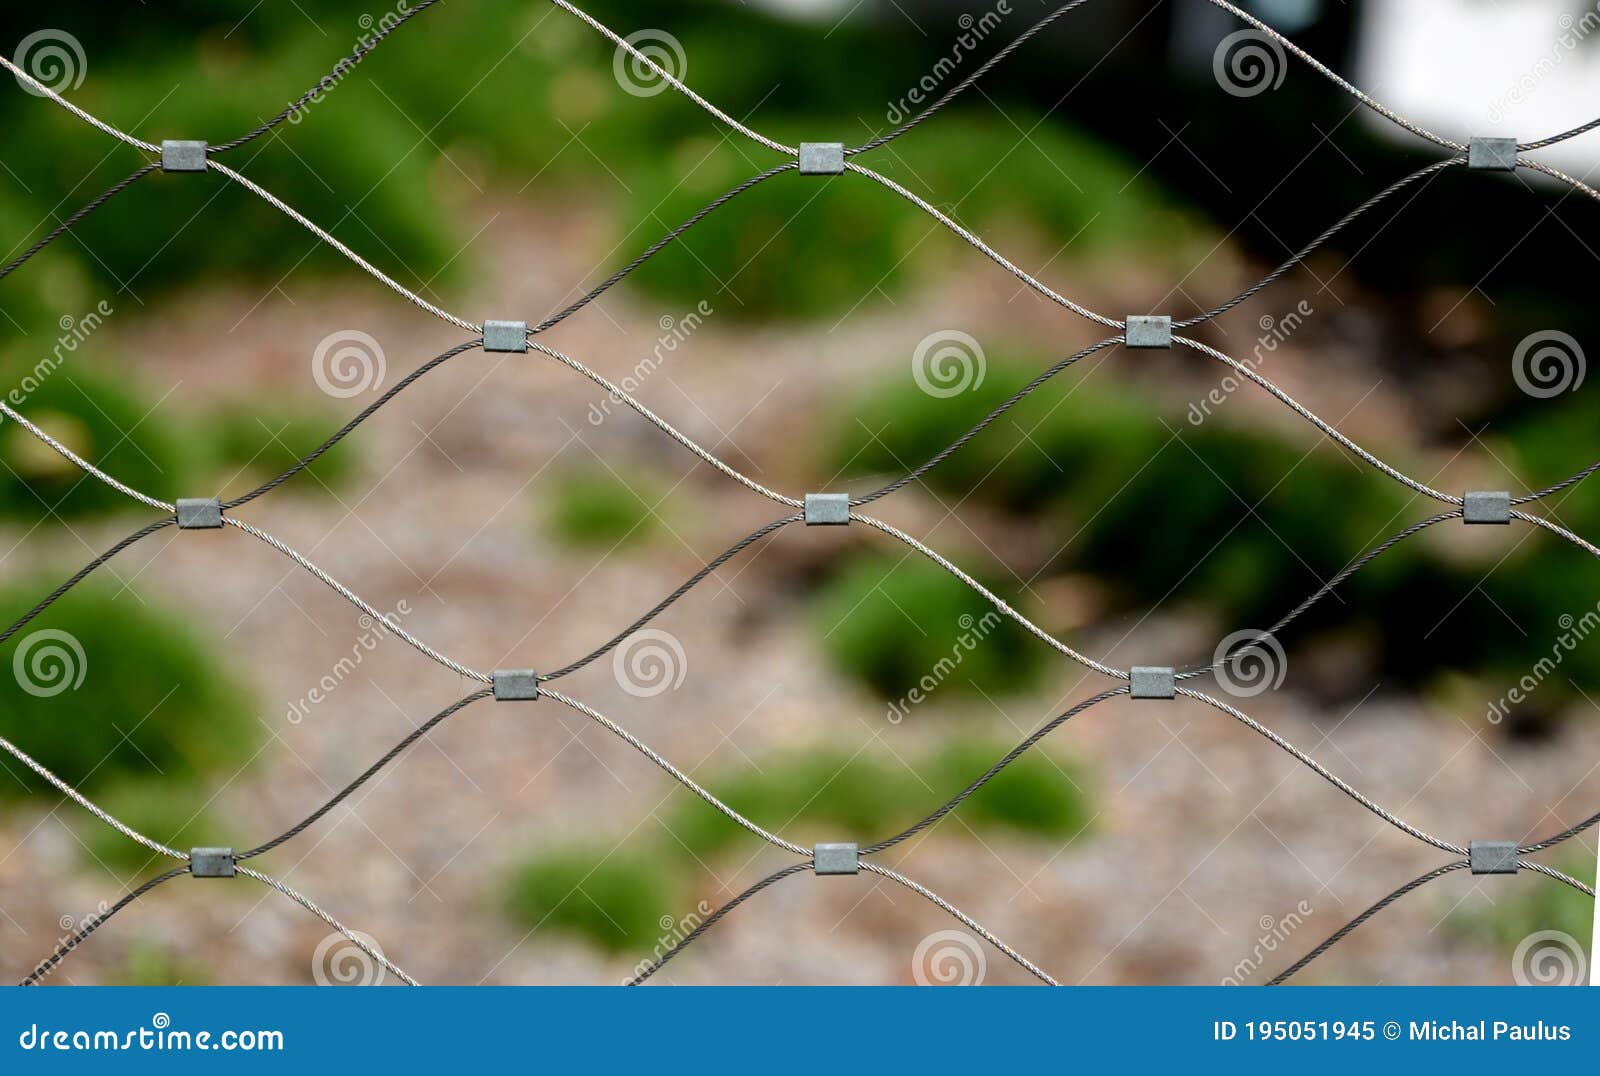 Wire Stainless Steel Net Made Of Ropes Connected By Metal Connectors As ...
